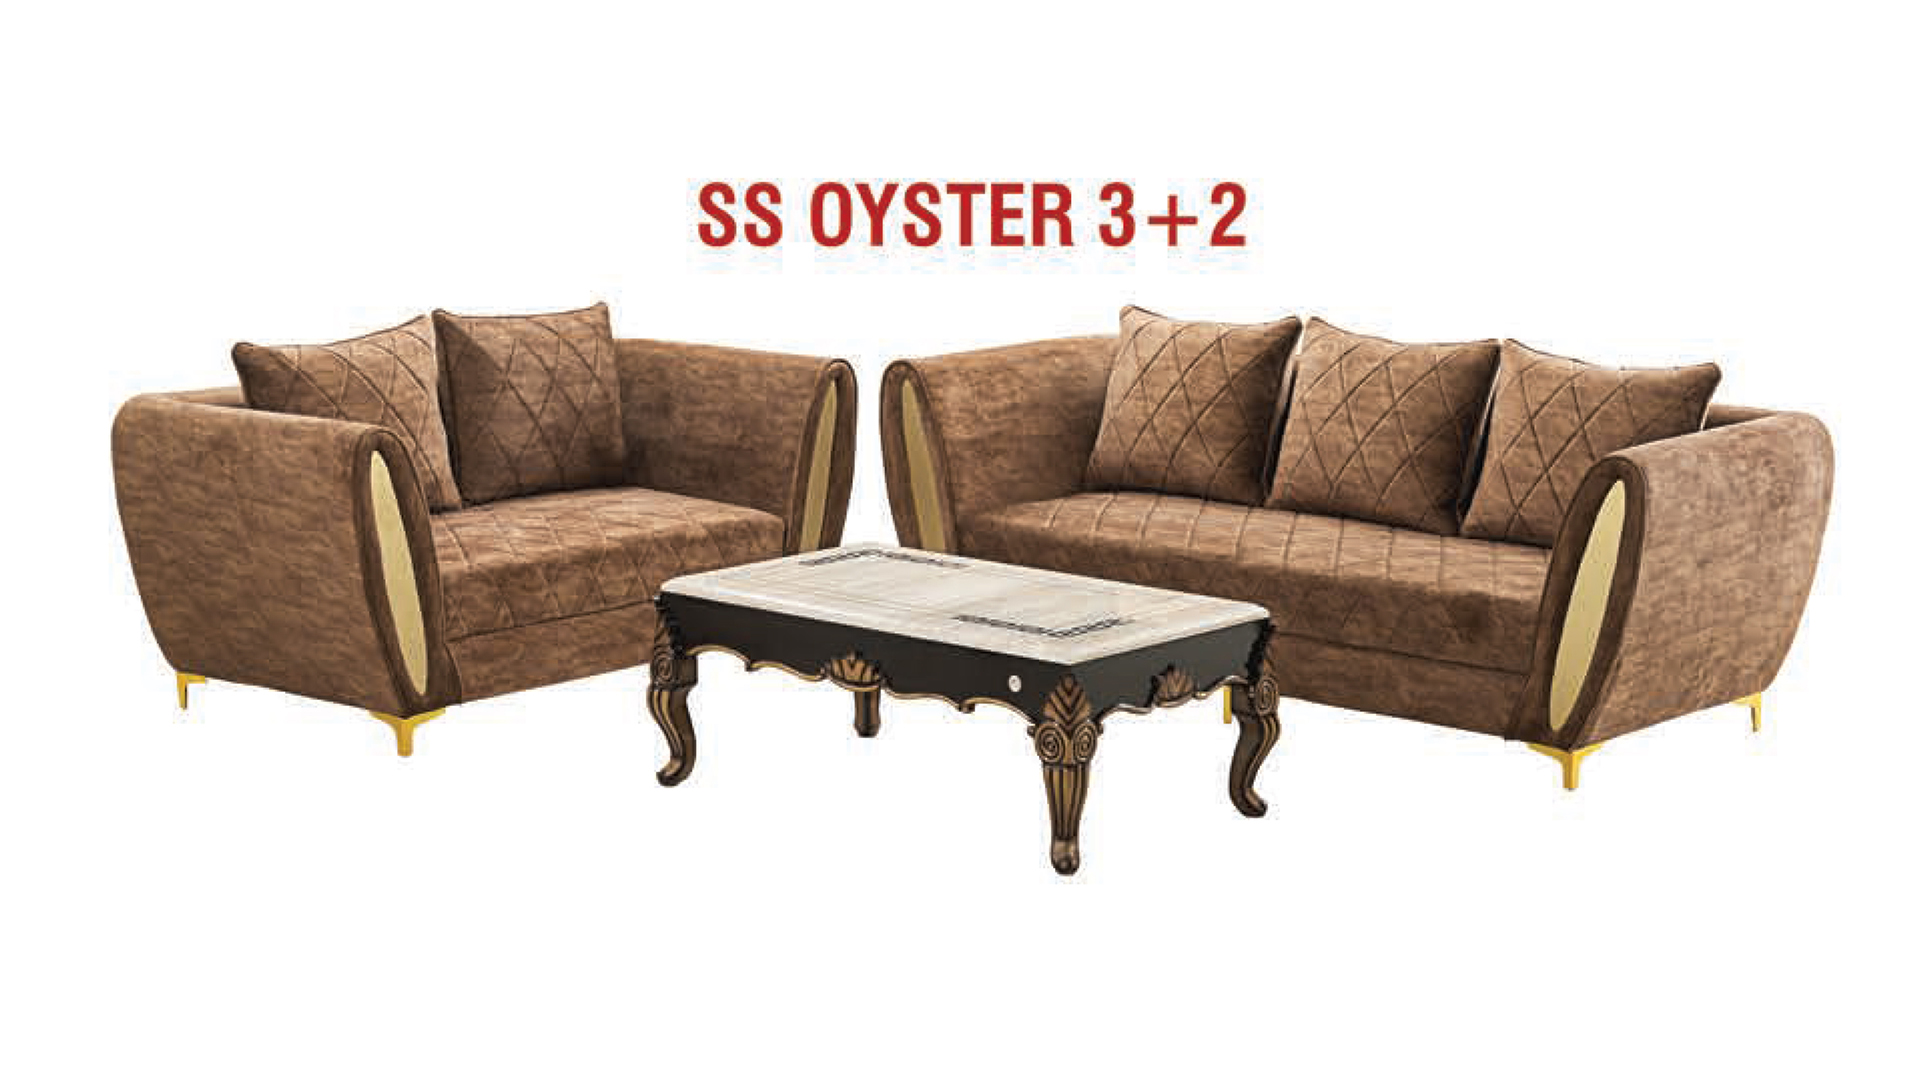 SS OYSTER 3+2